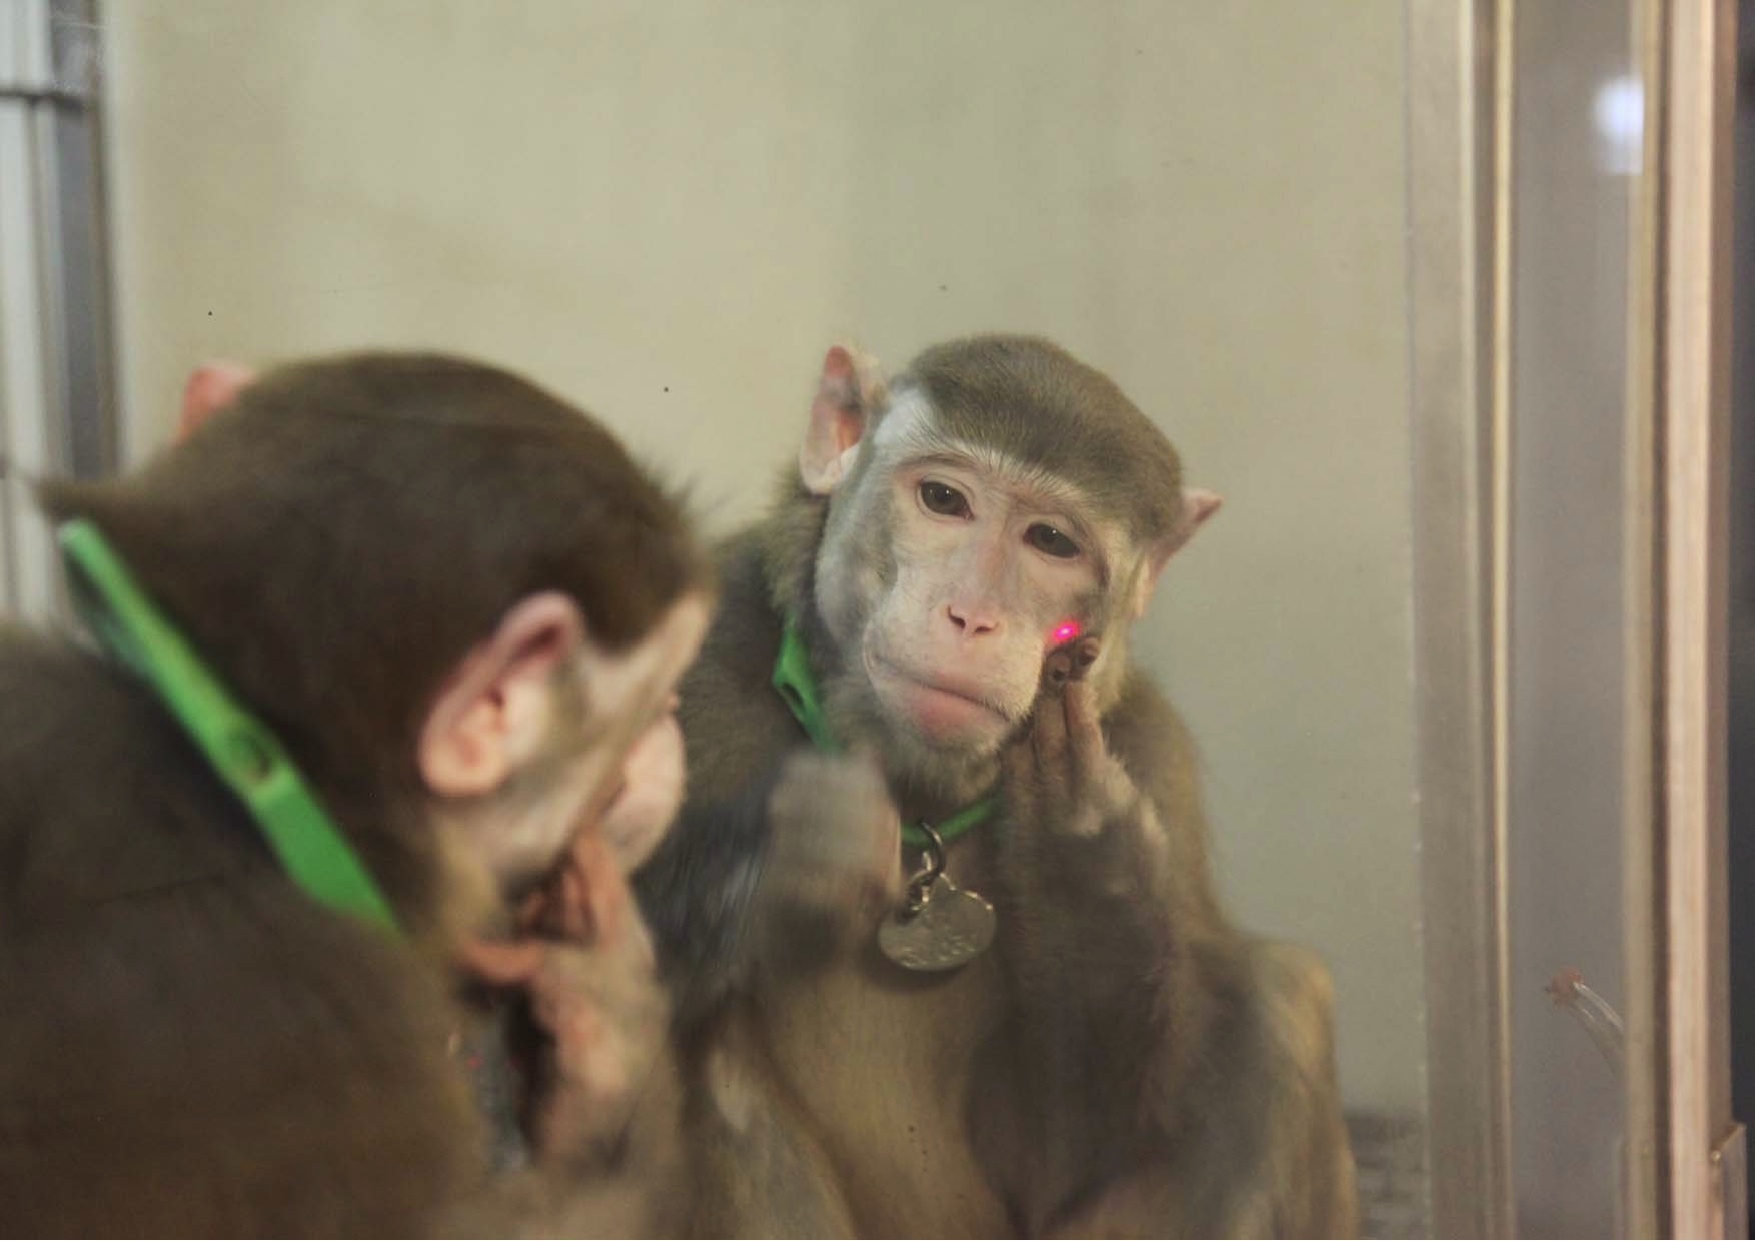 Monkeys exhibit a truly human quality, recognizing and relishing their  reflections - CBS News